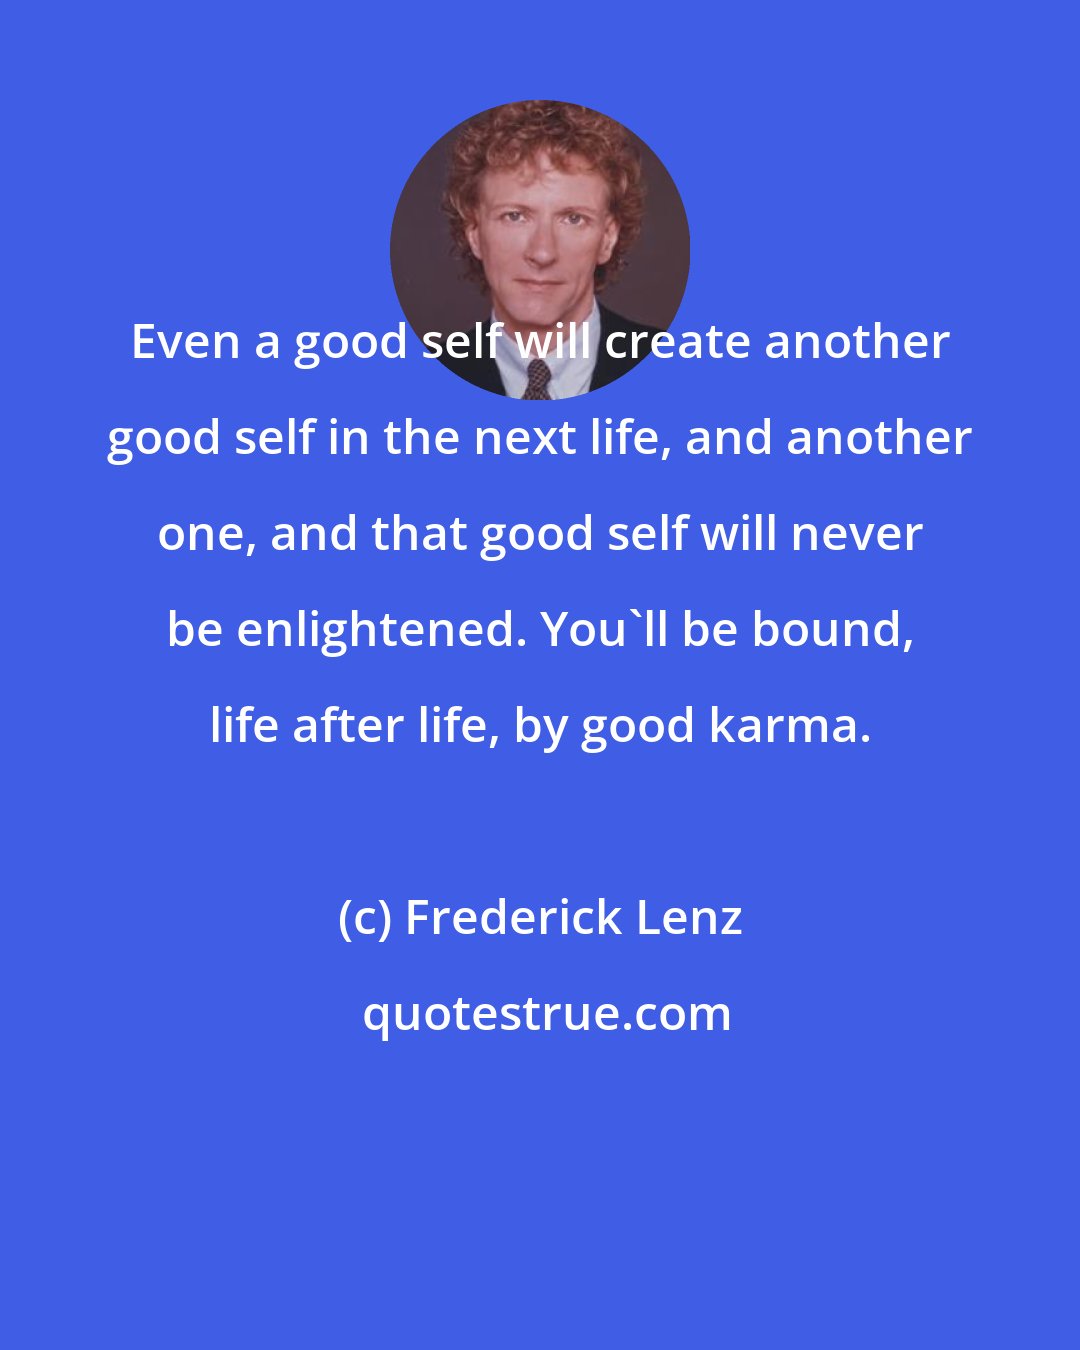 Frederick Lenz: Even a good self will create another good self in the next life, and another one, and that good self will never be enlightened. You'll be bound, life after life, by good karma.